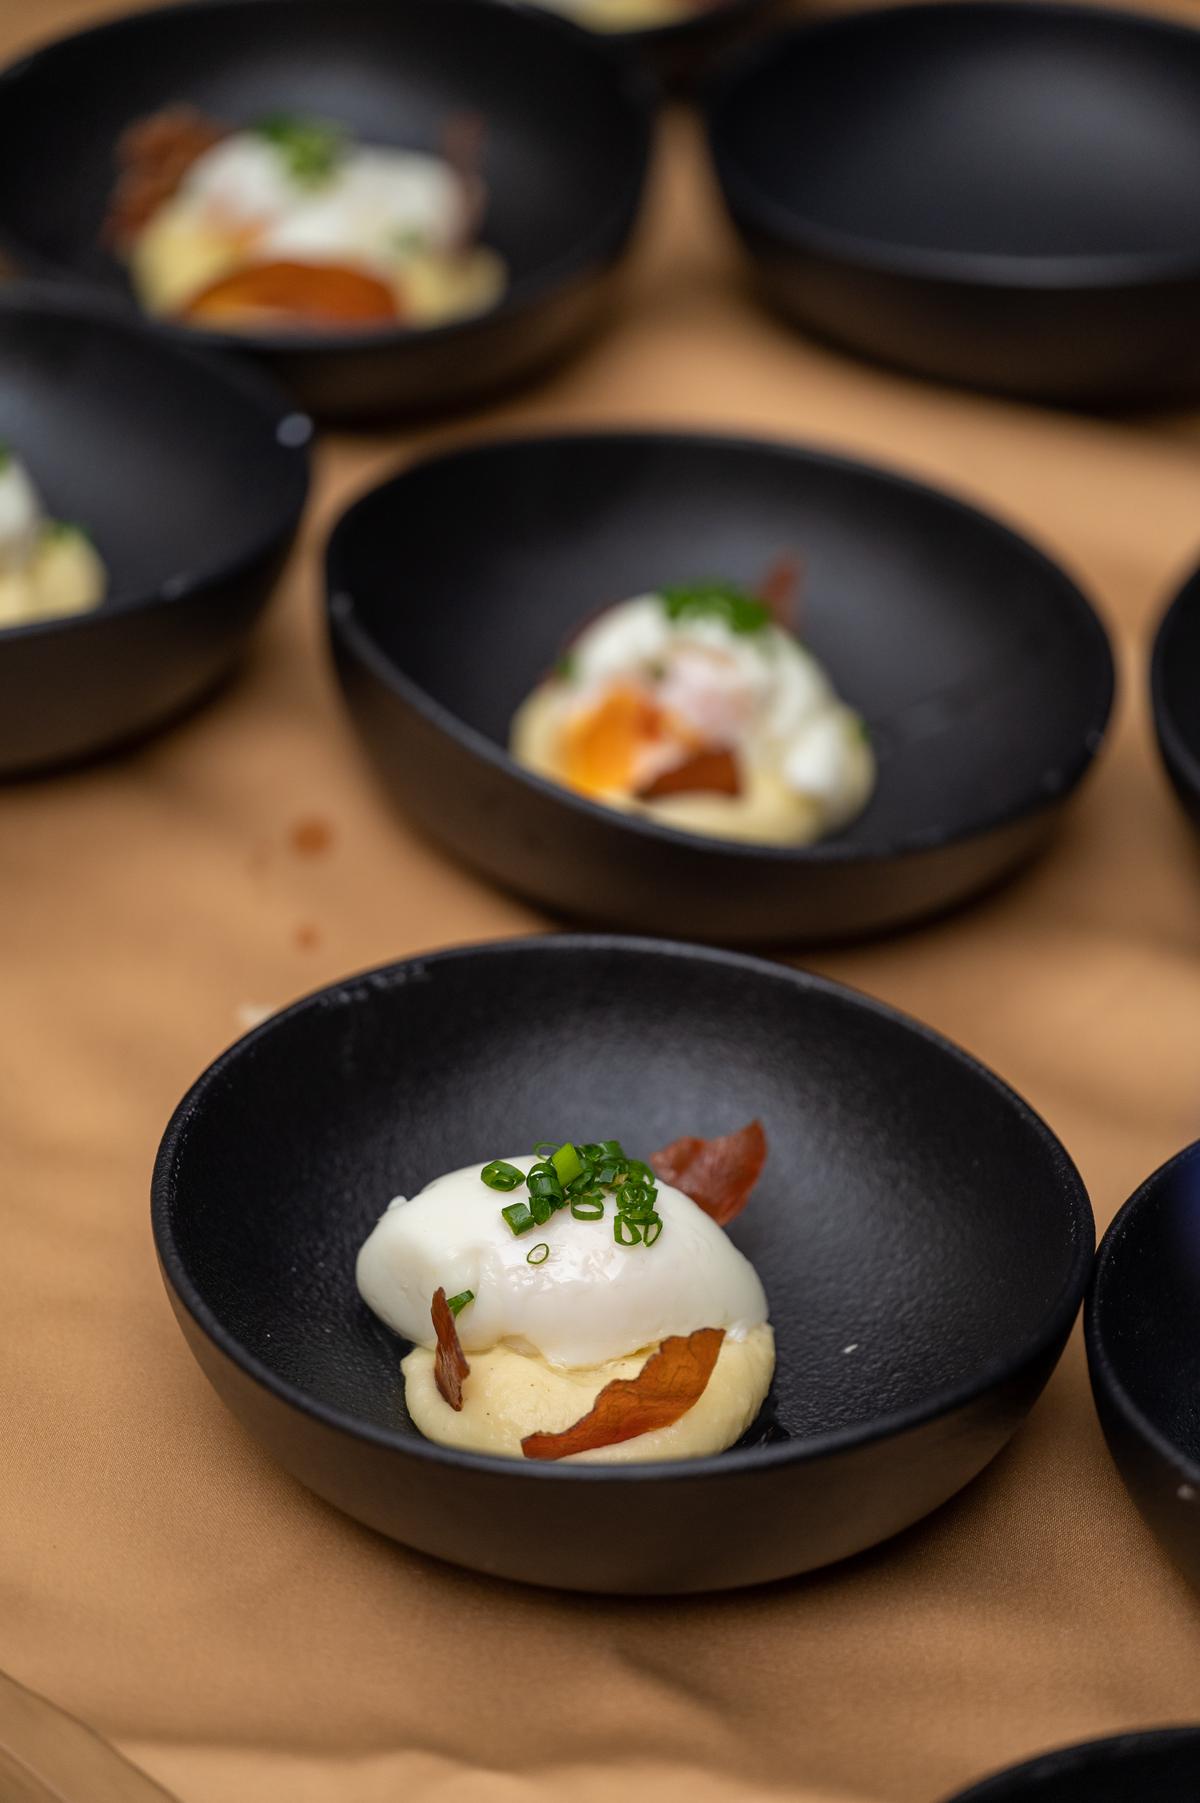 Slow cooked egg, truffled potato parmentier and jamon iberico by chef Omar Allibhoy 